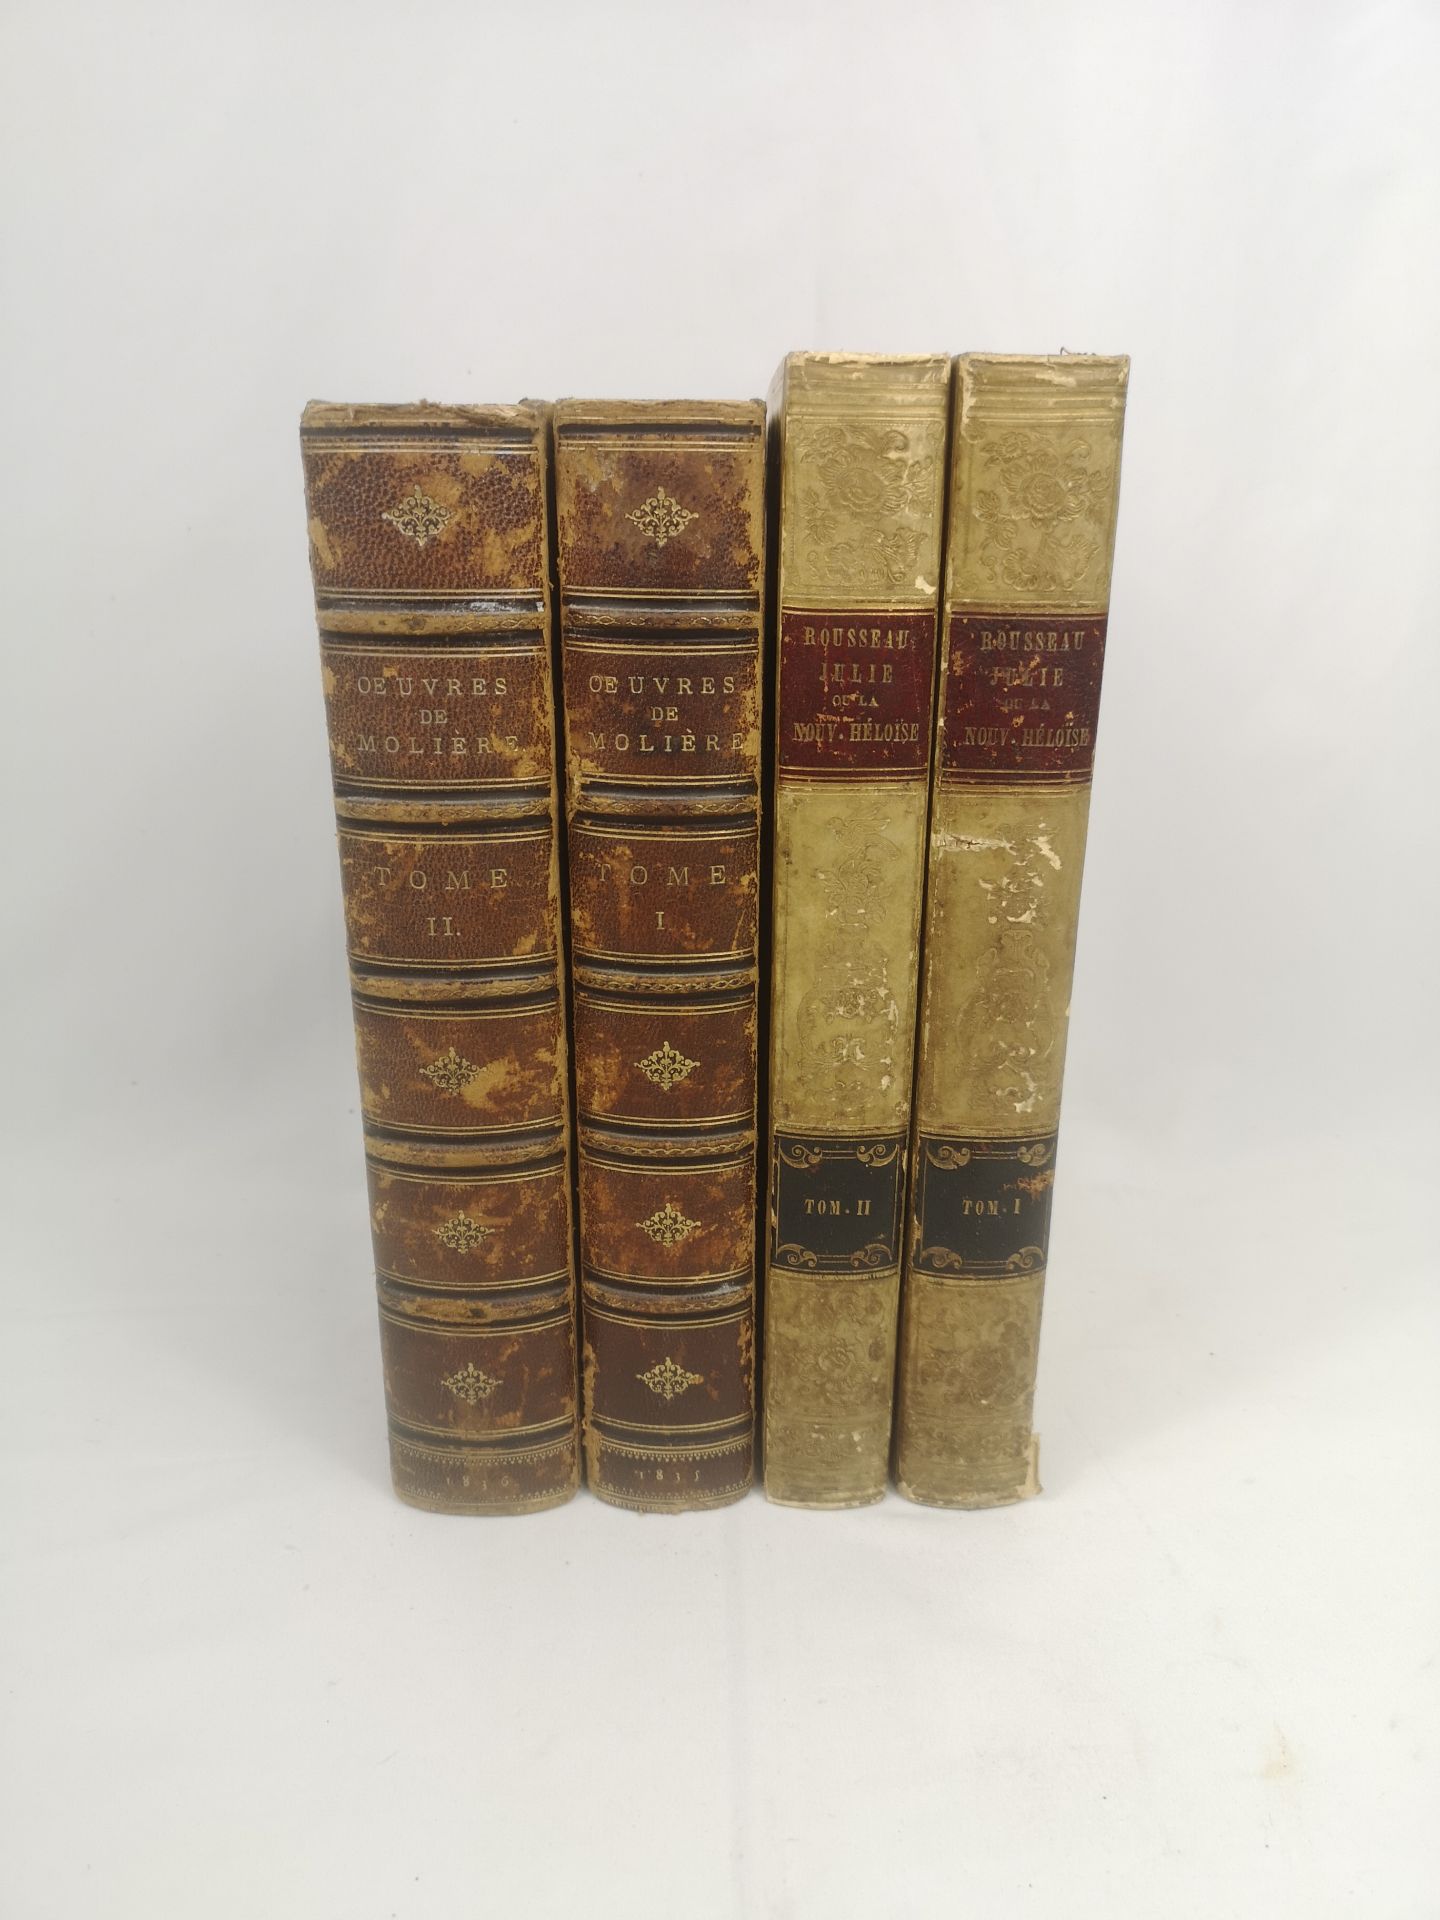 Four leather bound books